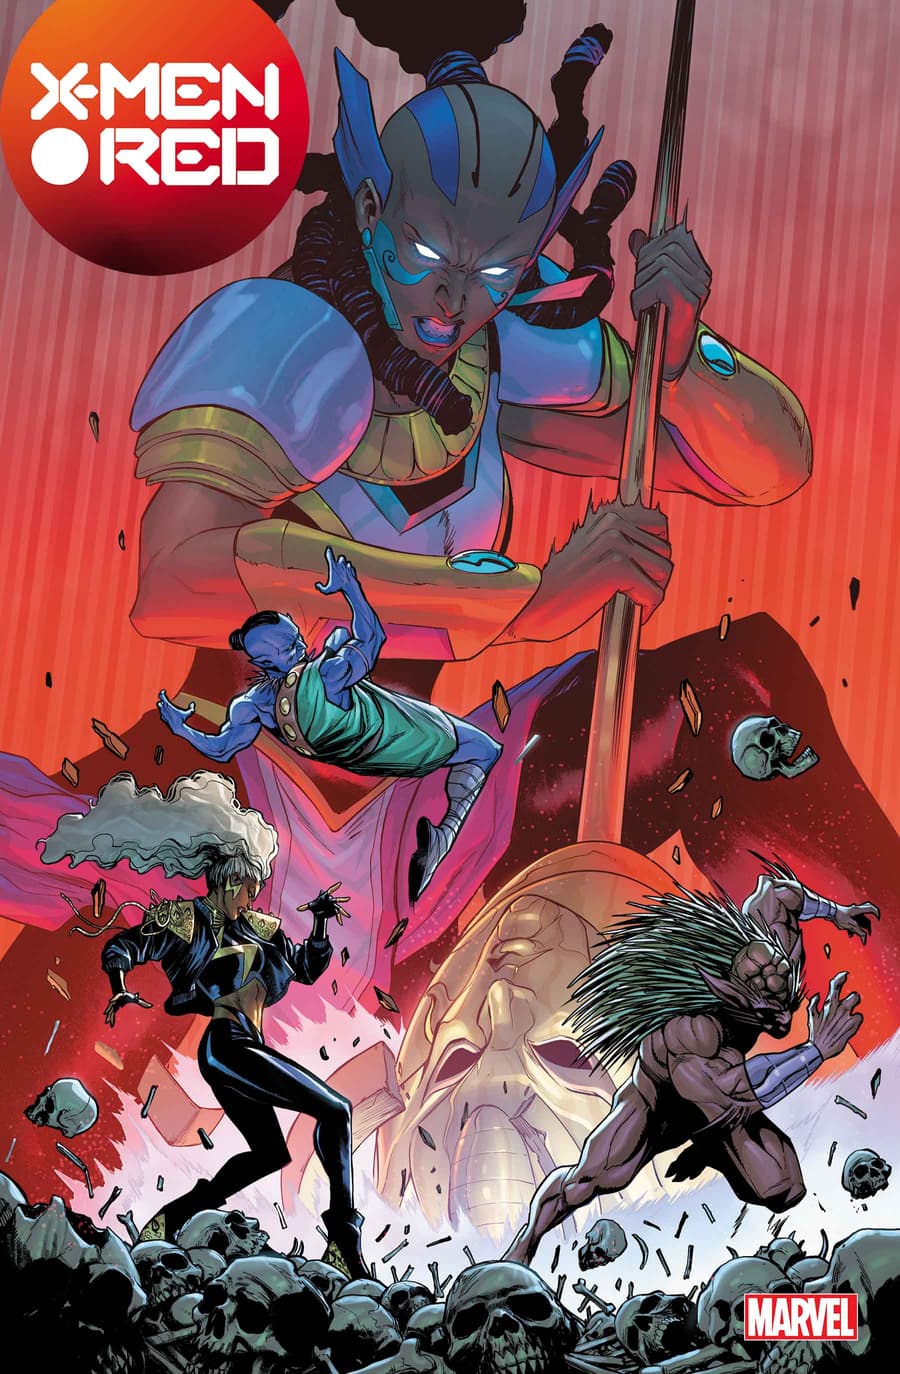 X-MEN RED #13 Cover by Stefano Caselli